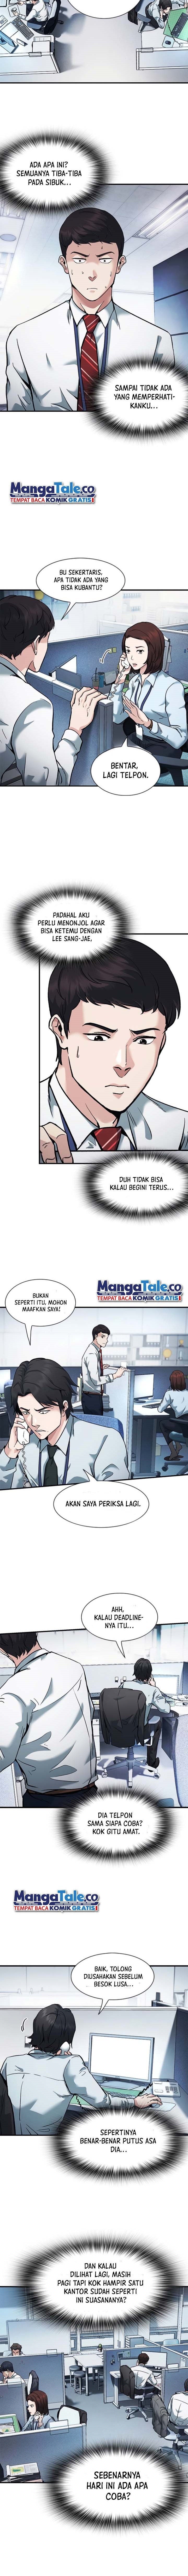 Chairman Kang, The New Employee Chapter 06